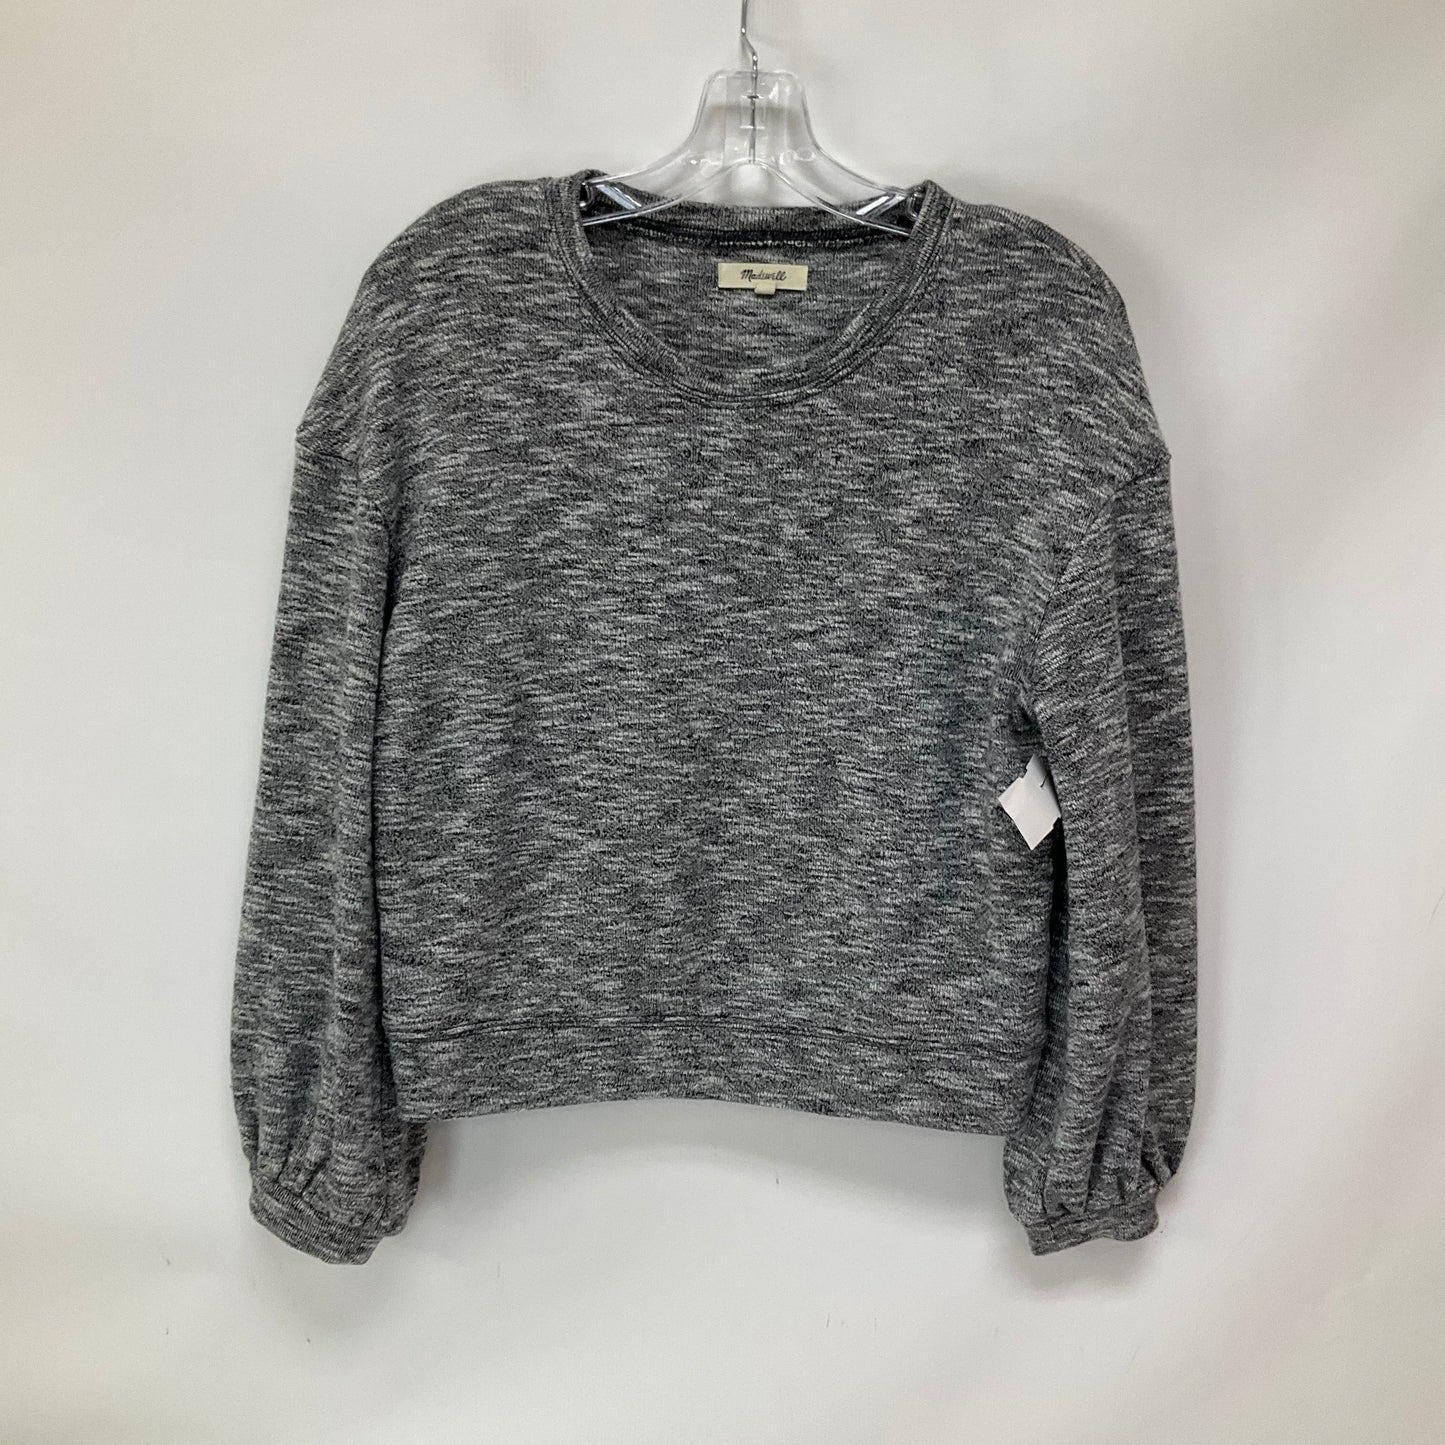 Black & White Top Long Sleeve Madewell, Size S